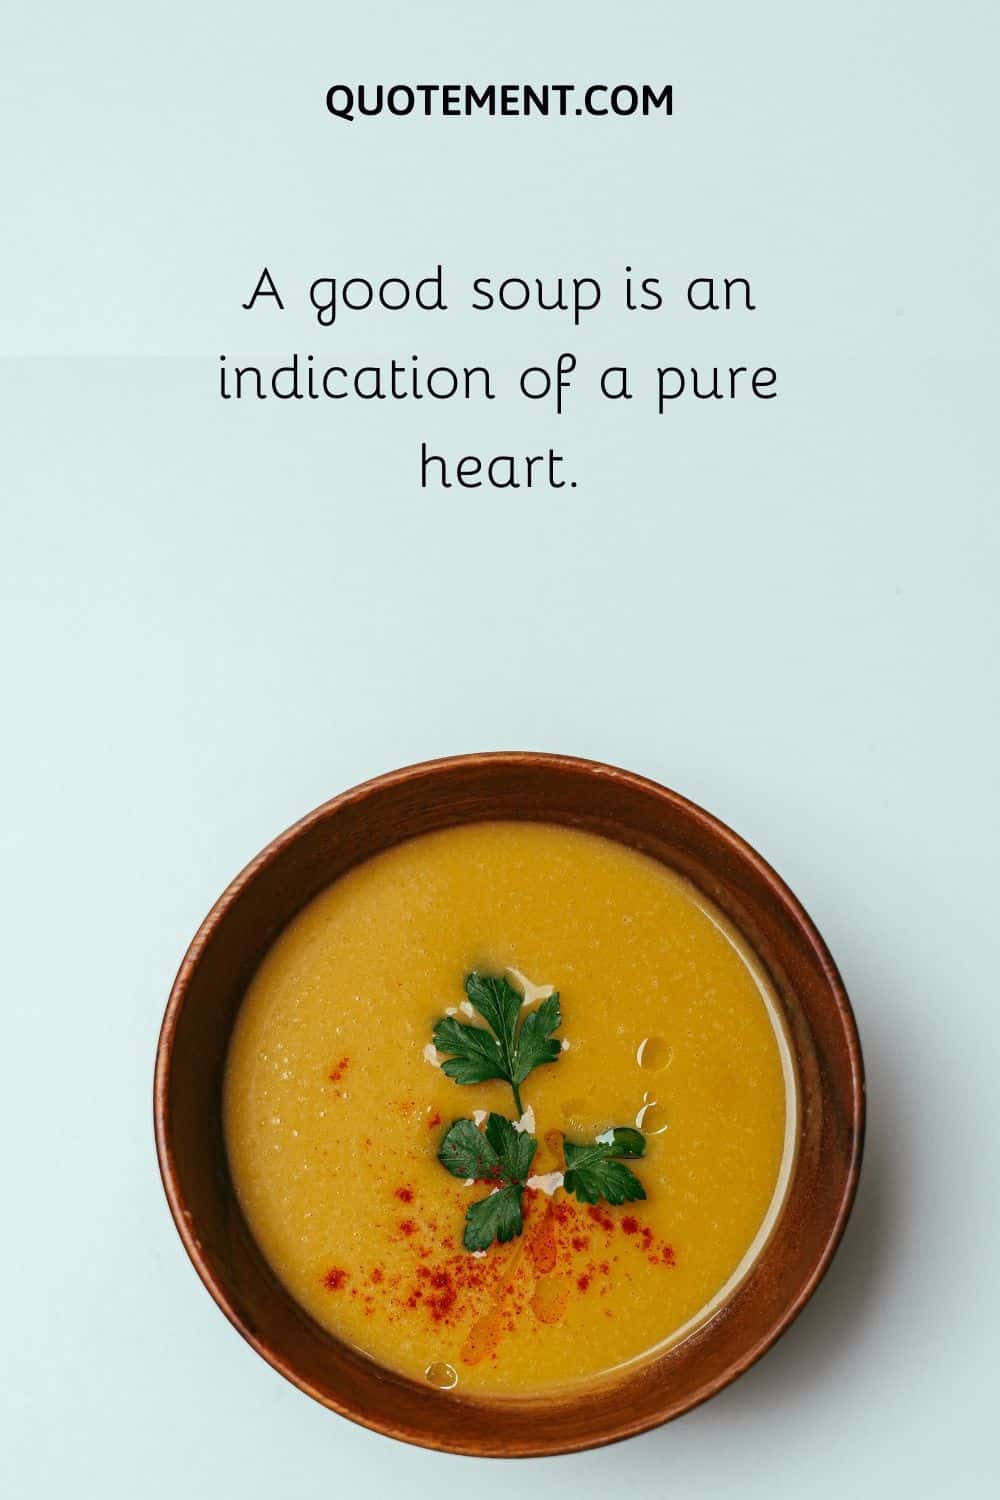 A good soup is an indication of a pure heart